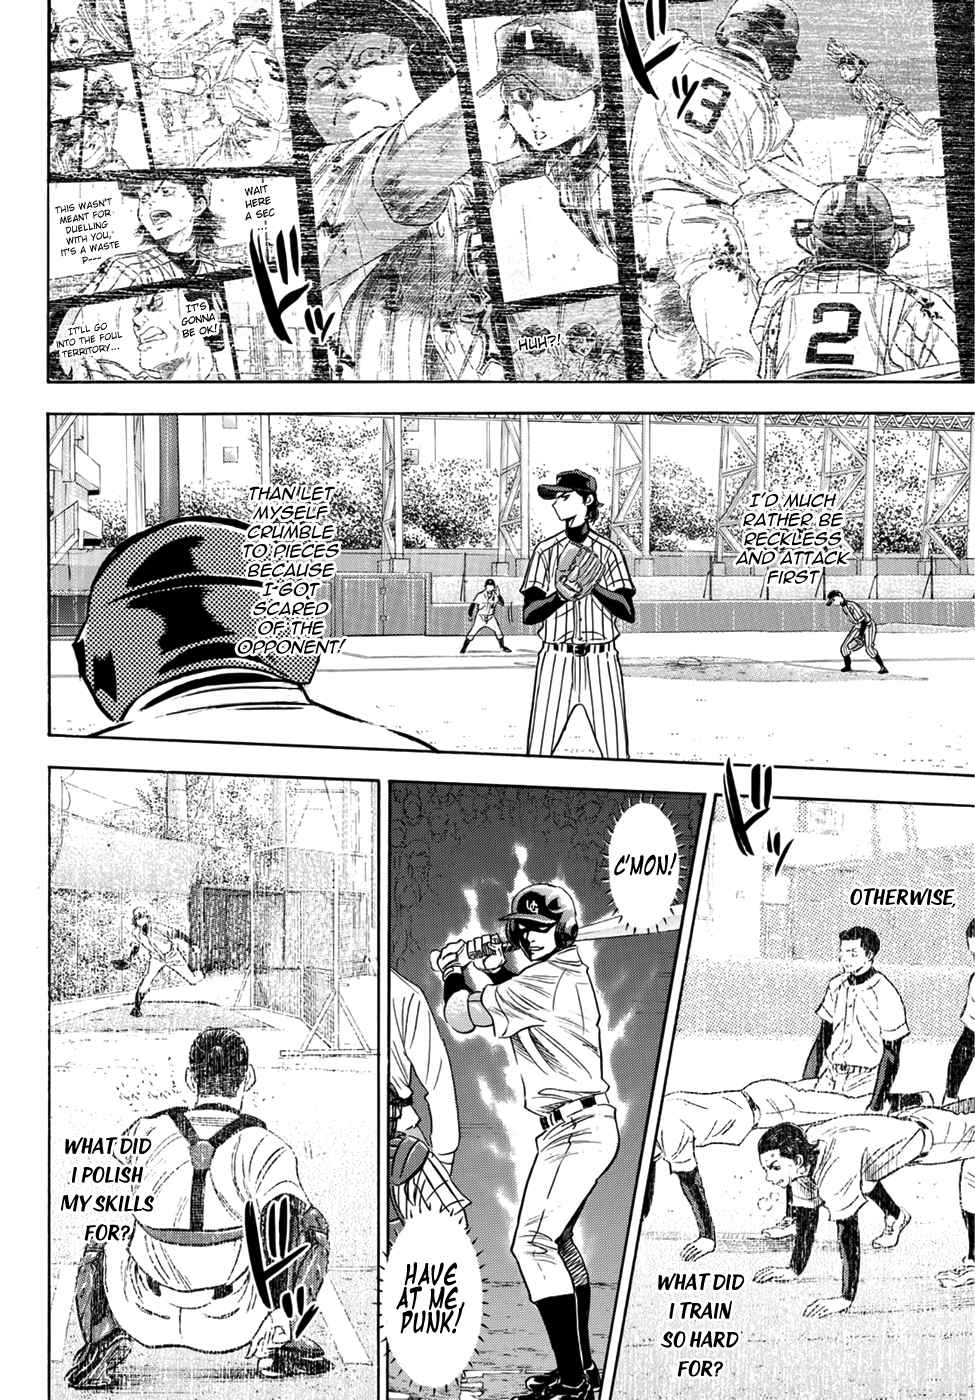 Diamond no Ace Act II Vol. 3 Ch. 26 The Me of the Past